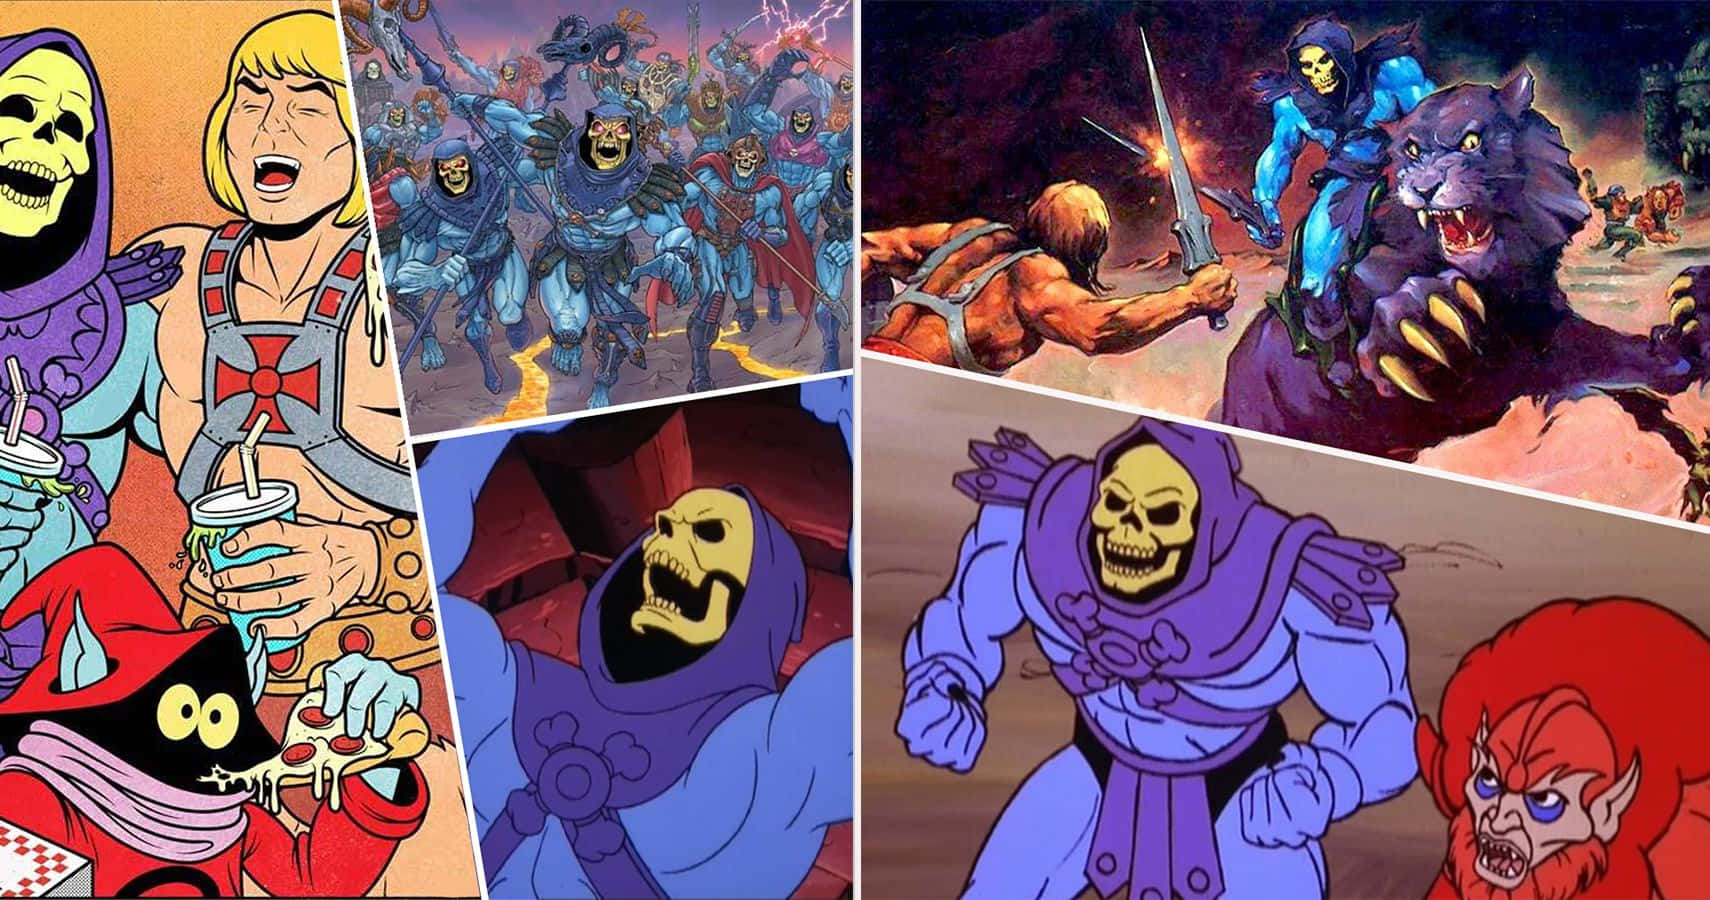 The Evil Villain Skeletor Is Ready To Take Over Background